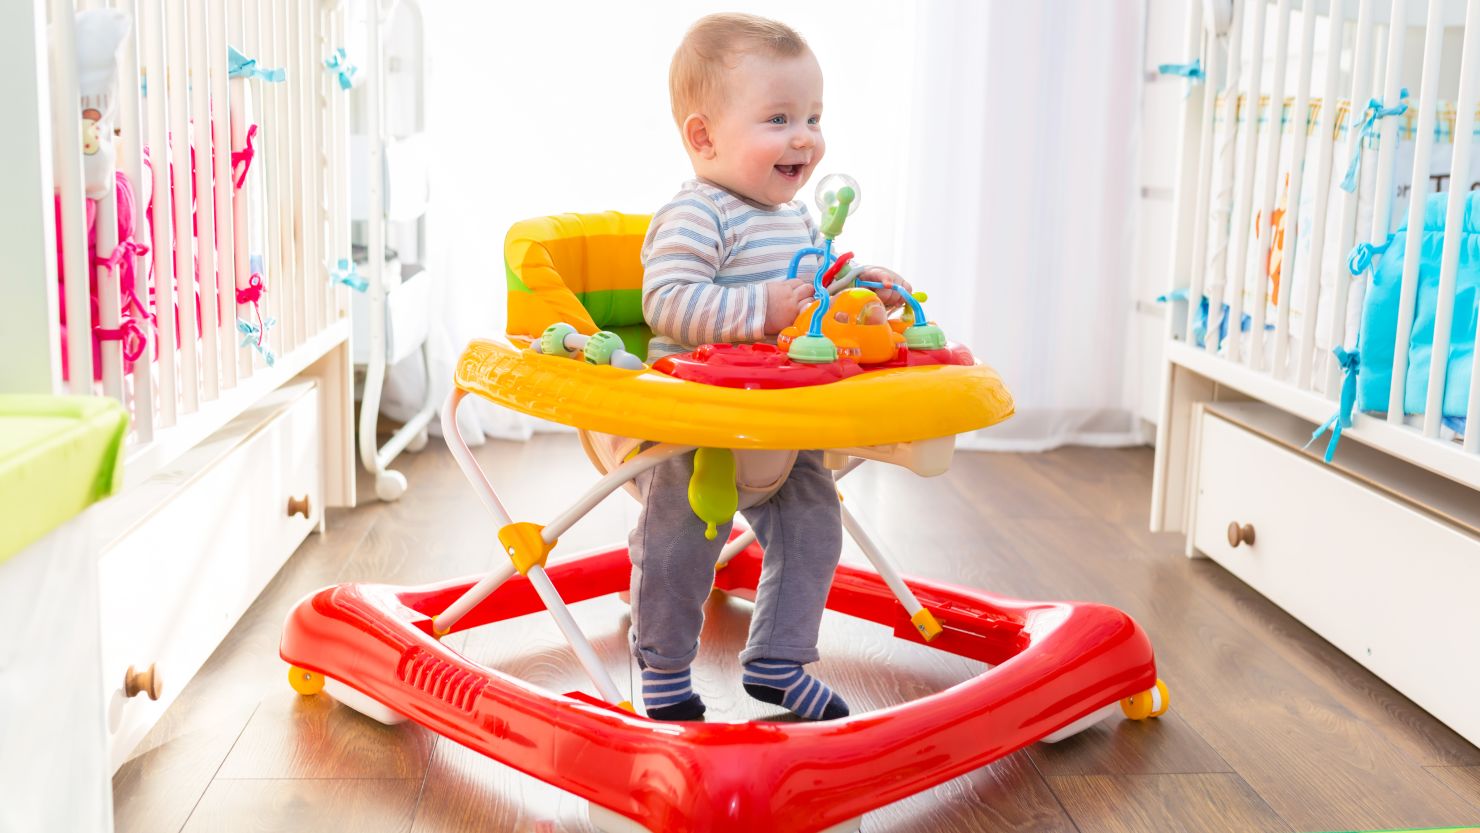 Infant walkers: More than 9,000 US children injured every year